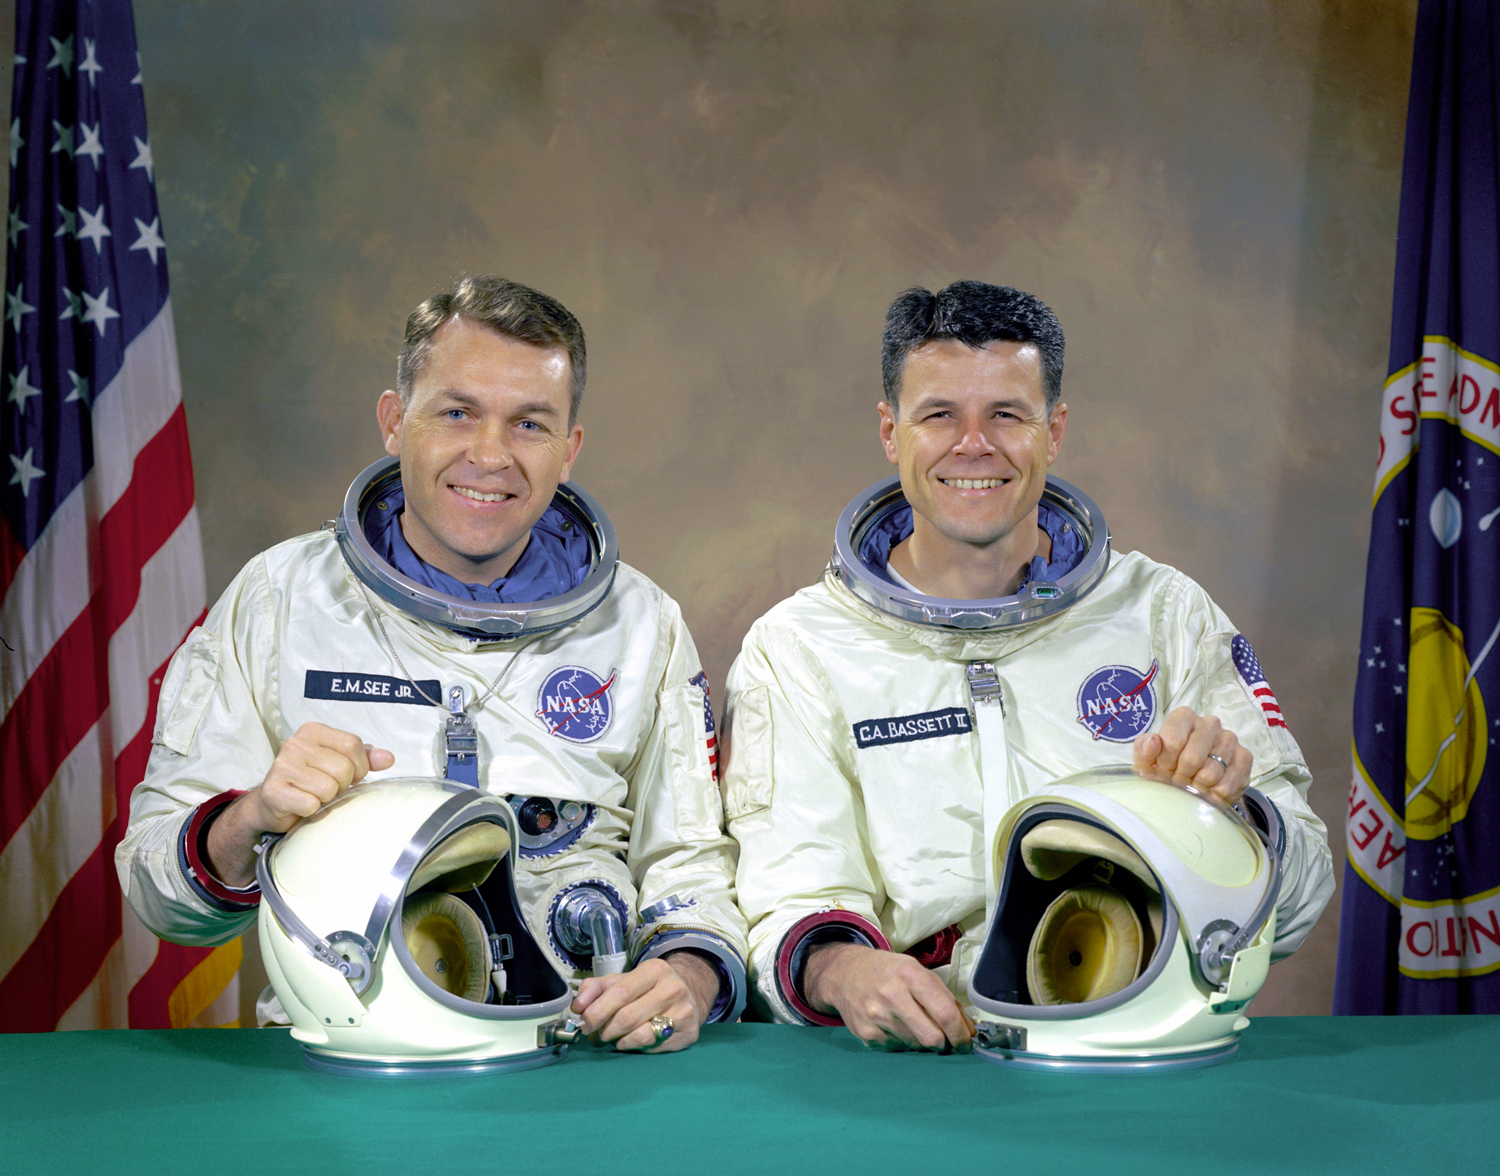 Assigned in November 1965, the Gemini IX crew of Elliot See (left) and Charlie Bassett were tasked with flying a 48-72-hour mission in the late spring of 1966. Their flight would have demonstrated rendezvous, docking, maneuvering and spacewalking. Photo Credit: NASA